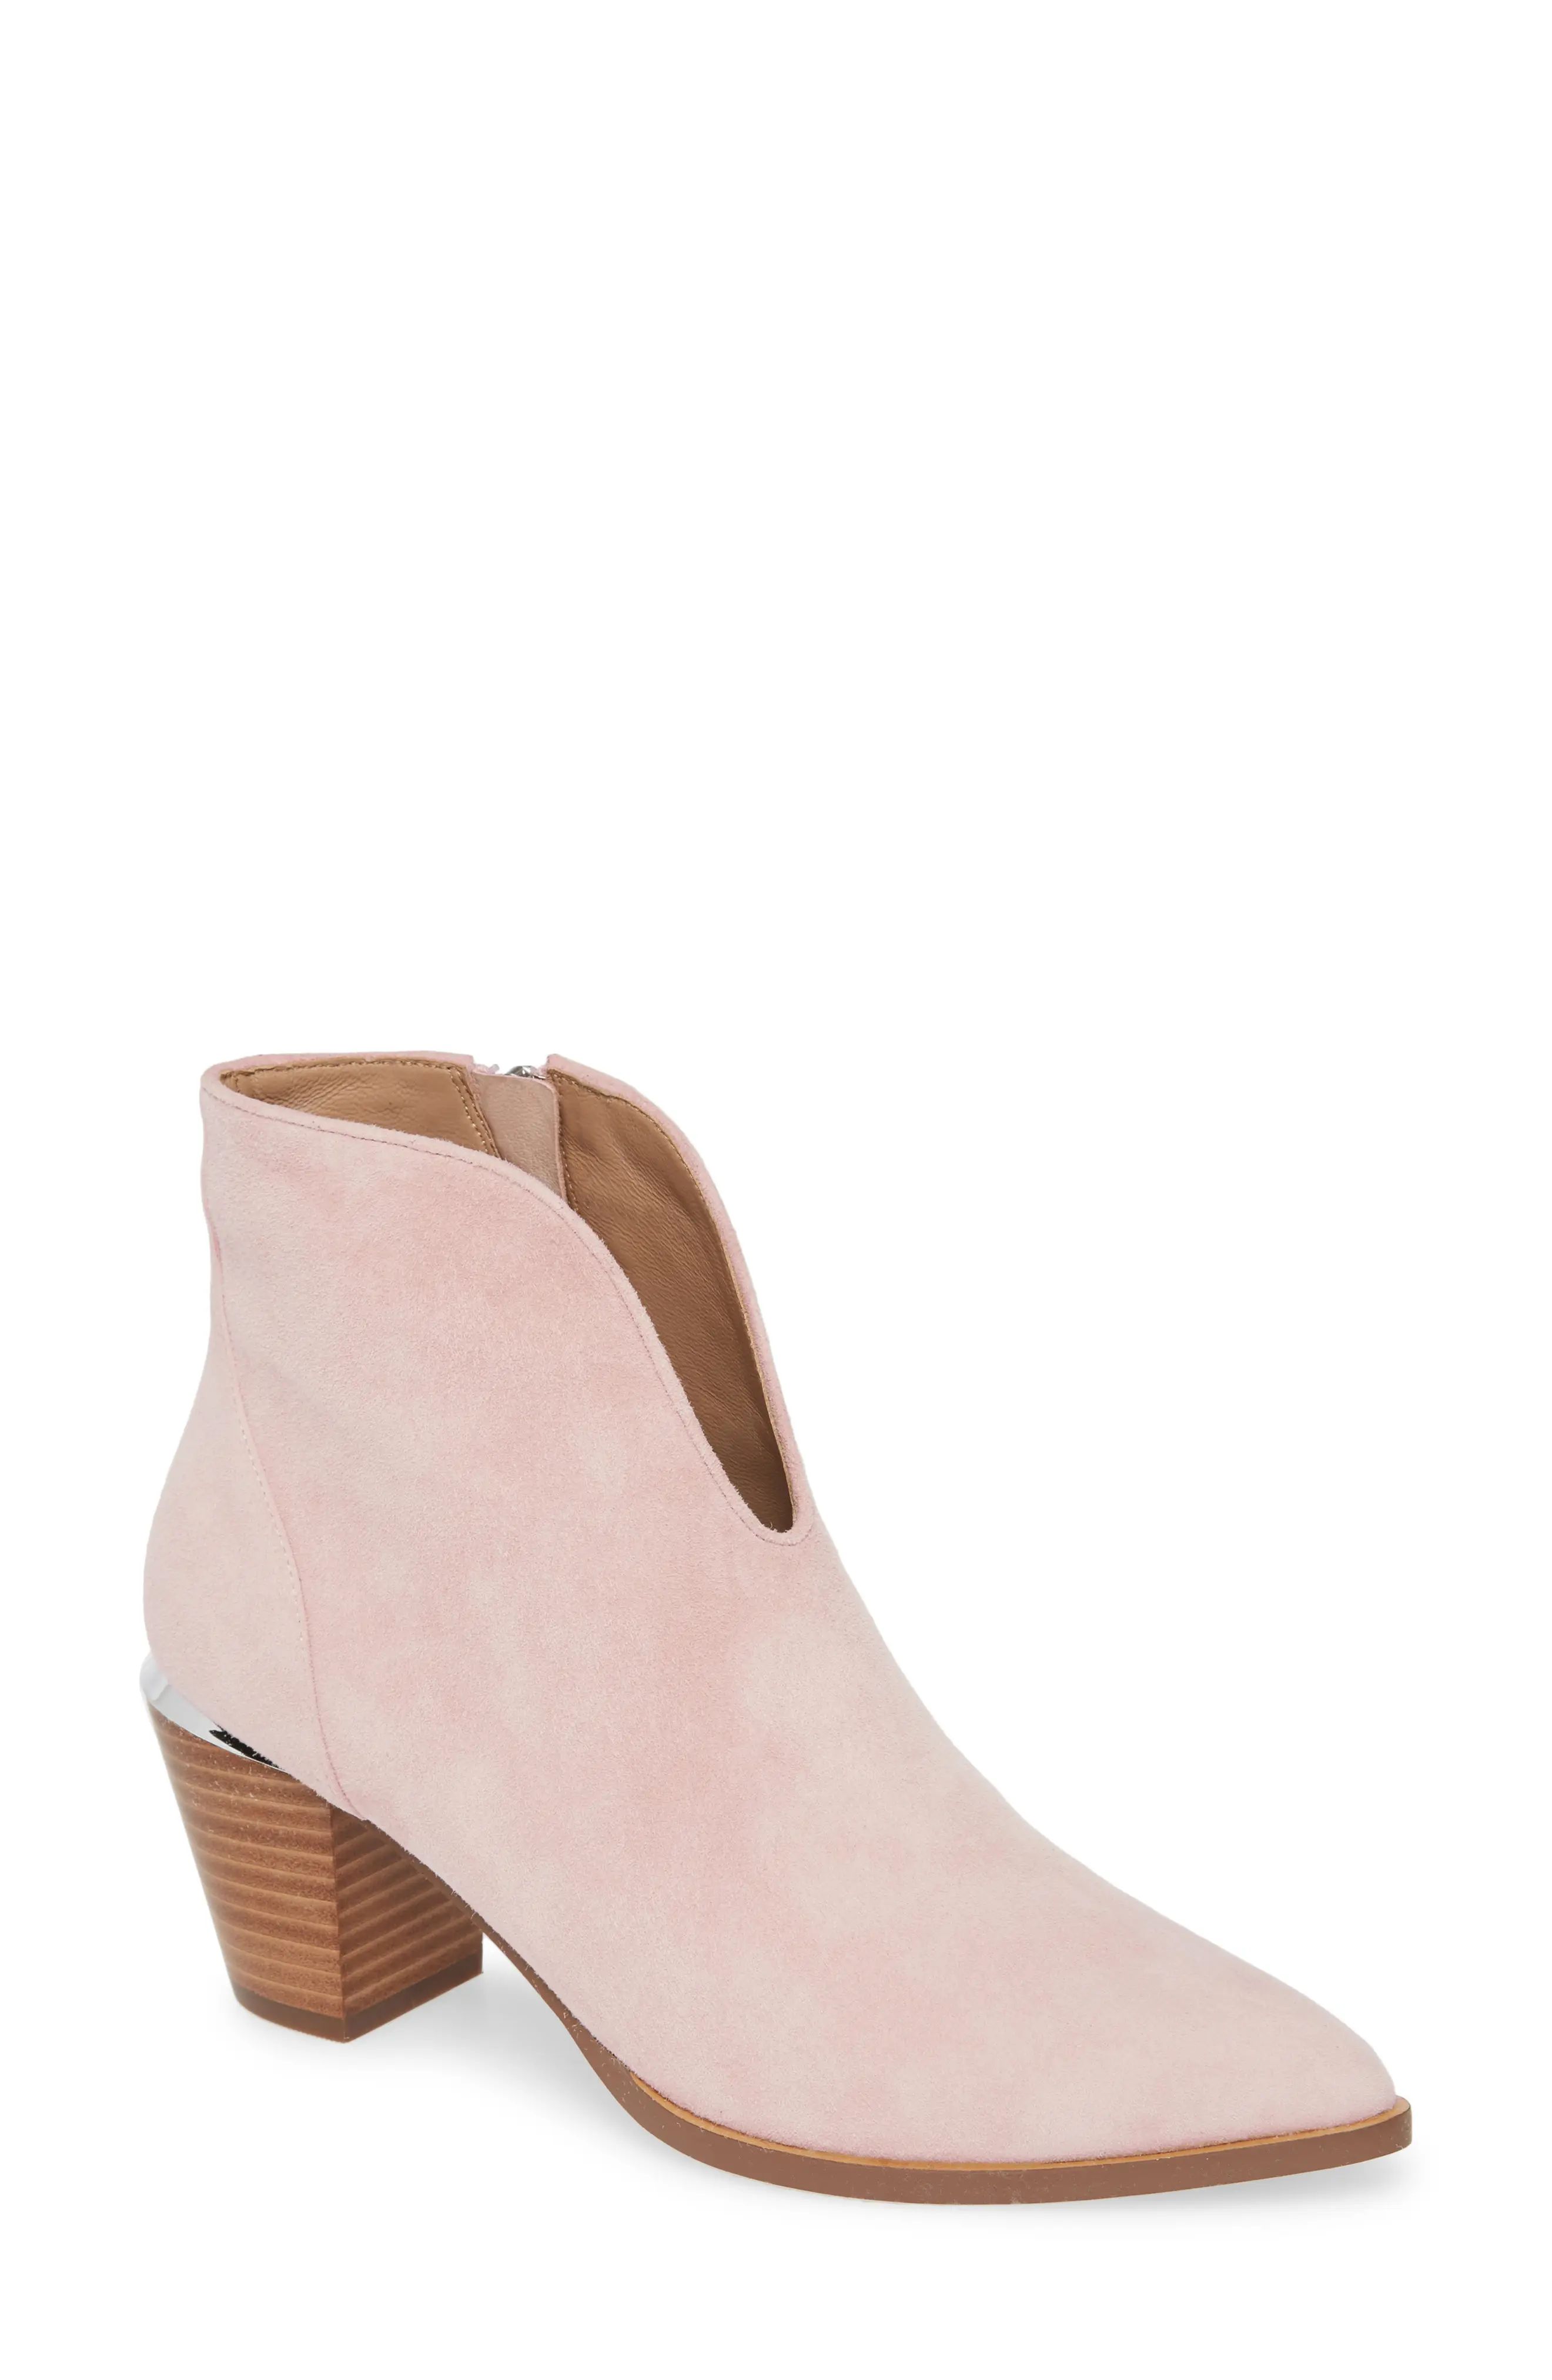 Women's Linea Paolo Westly Bootie, Size 10 M - Pink | Nordstrom